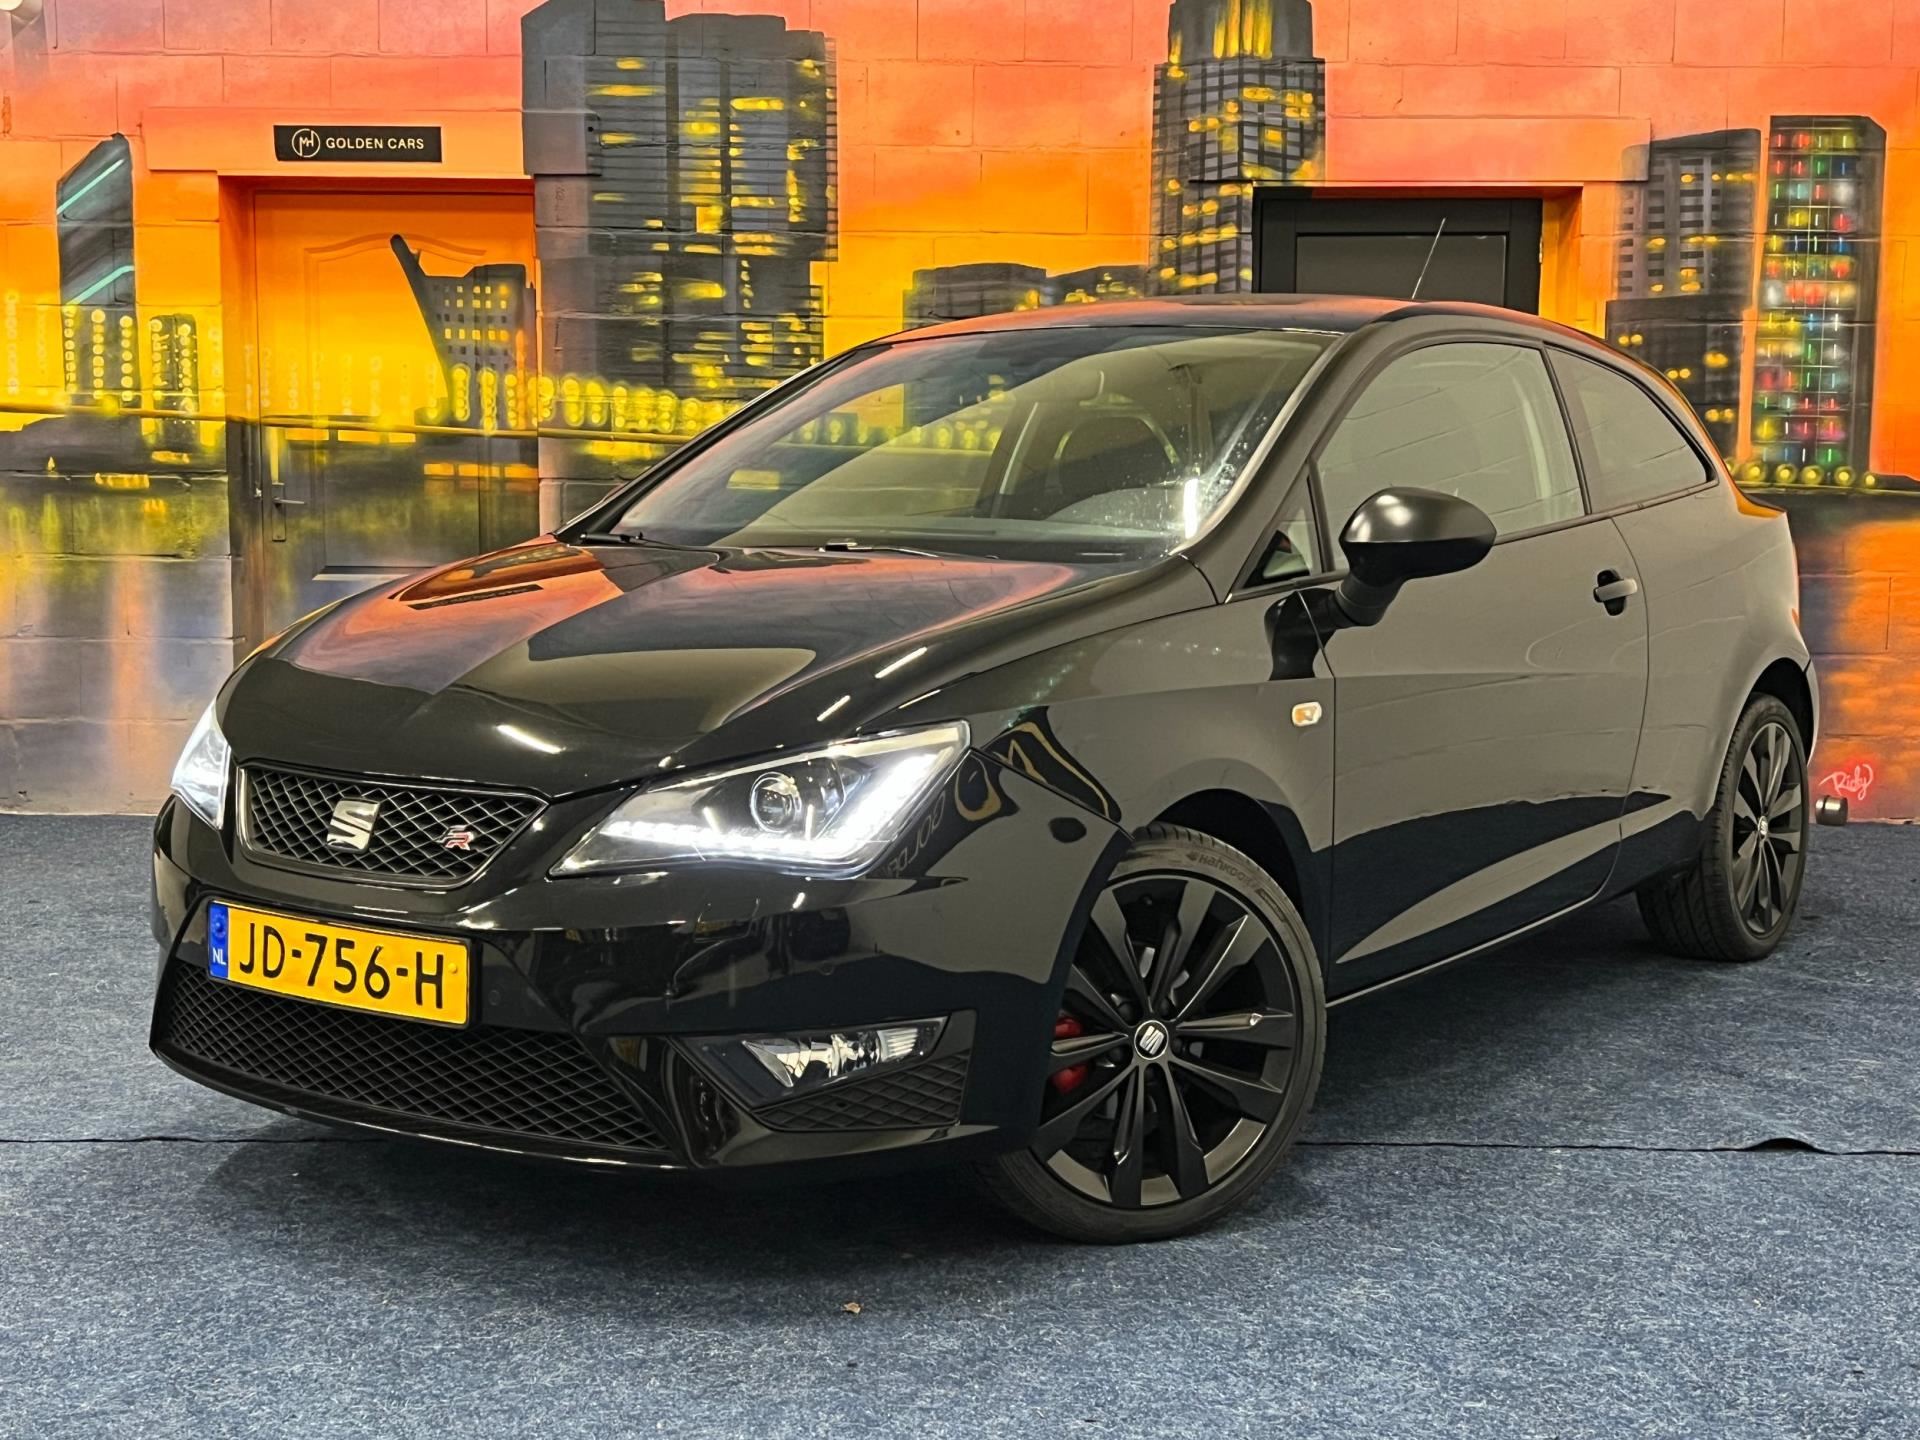 Seat Ibiza SC occasion - MH Golden Cars